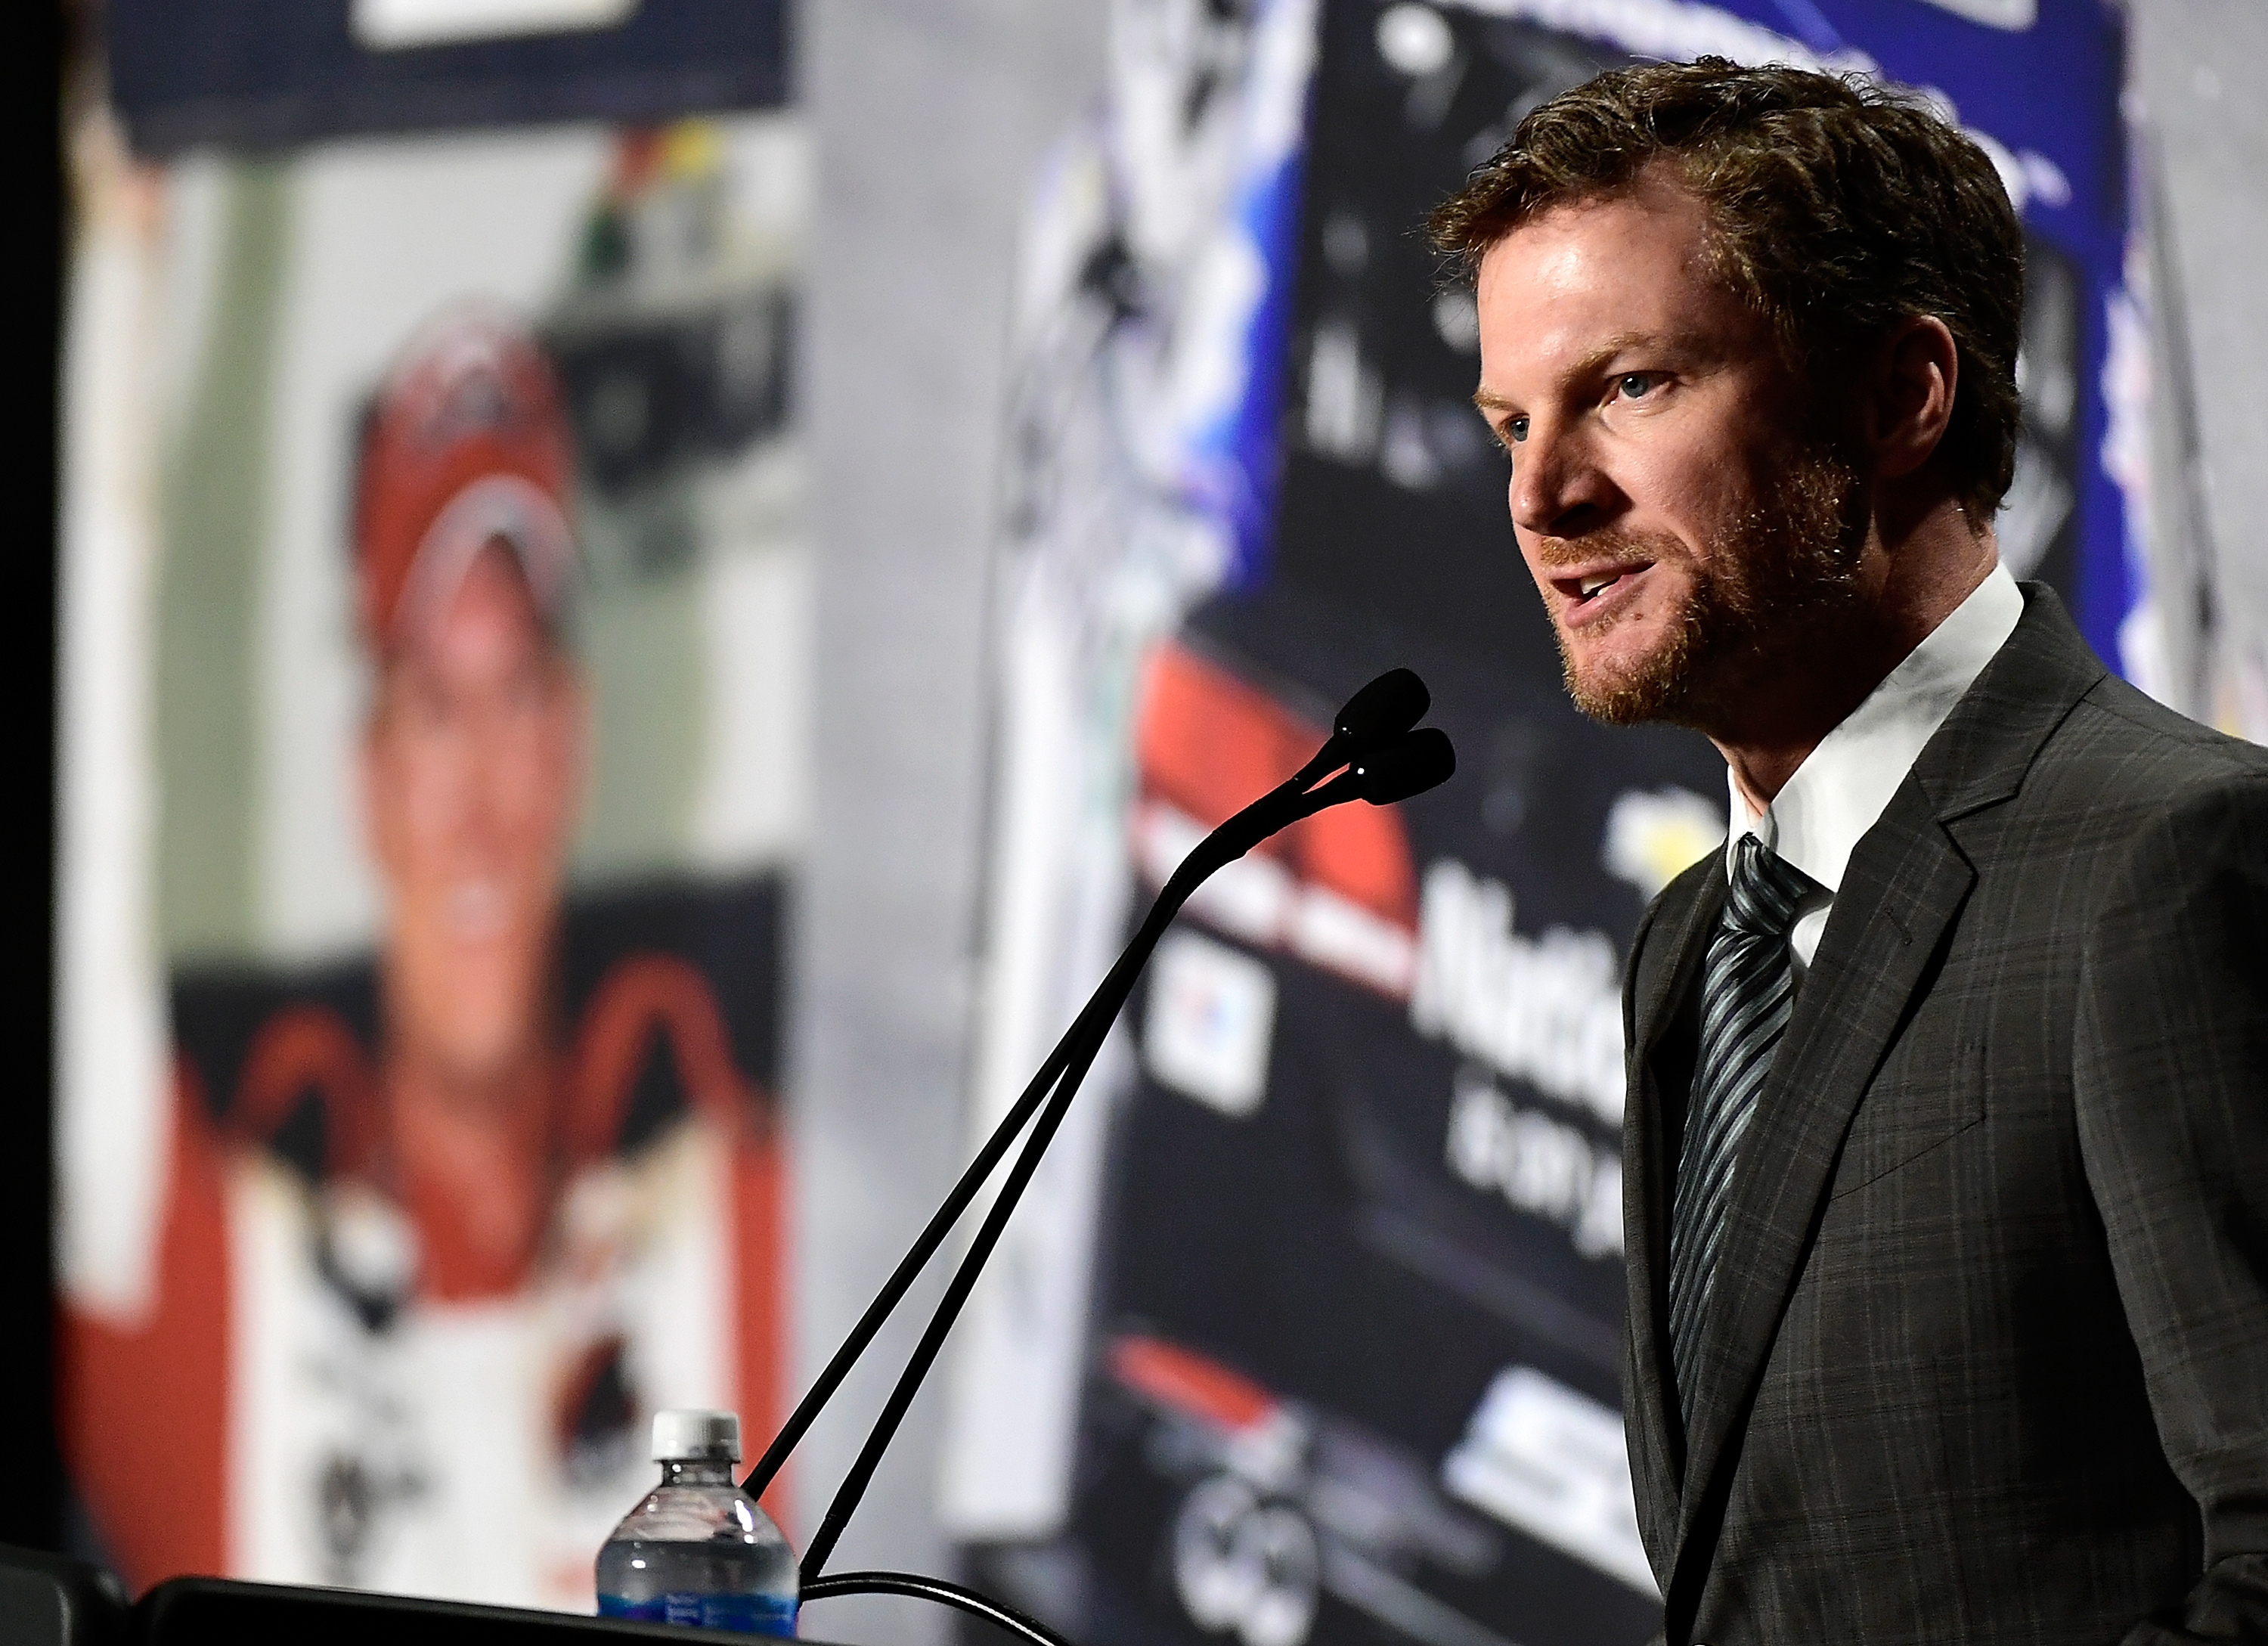 CHARLOTTE, NC - APRIL 25: Dale Earnhardt Jr. gives a statement announcing his retirement from NASCAR after the 2017 season at the Hendrick Motorsports Team Center on April 25, 2017 in Charlotte, North Carolina. (Photo by Mike Comer/Getty Images) | Getty Images